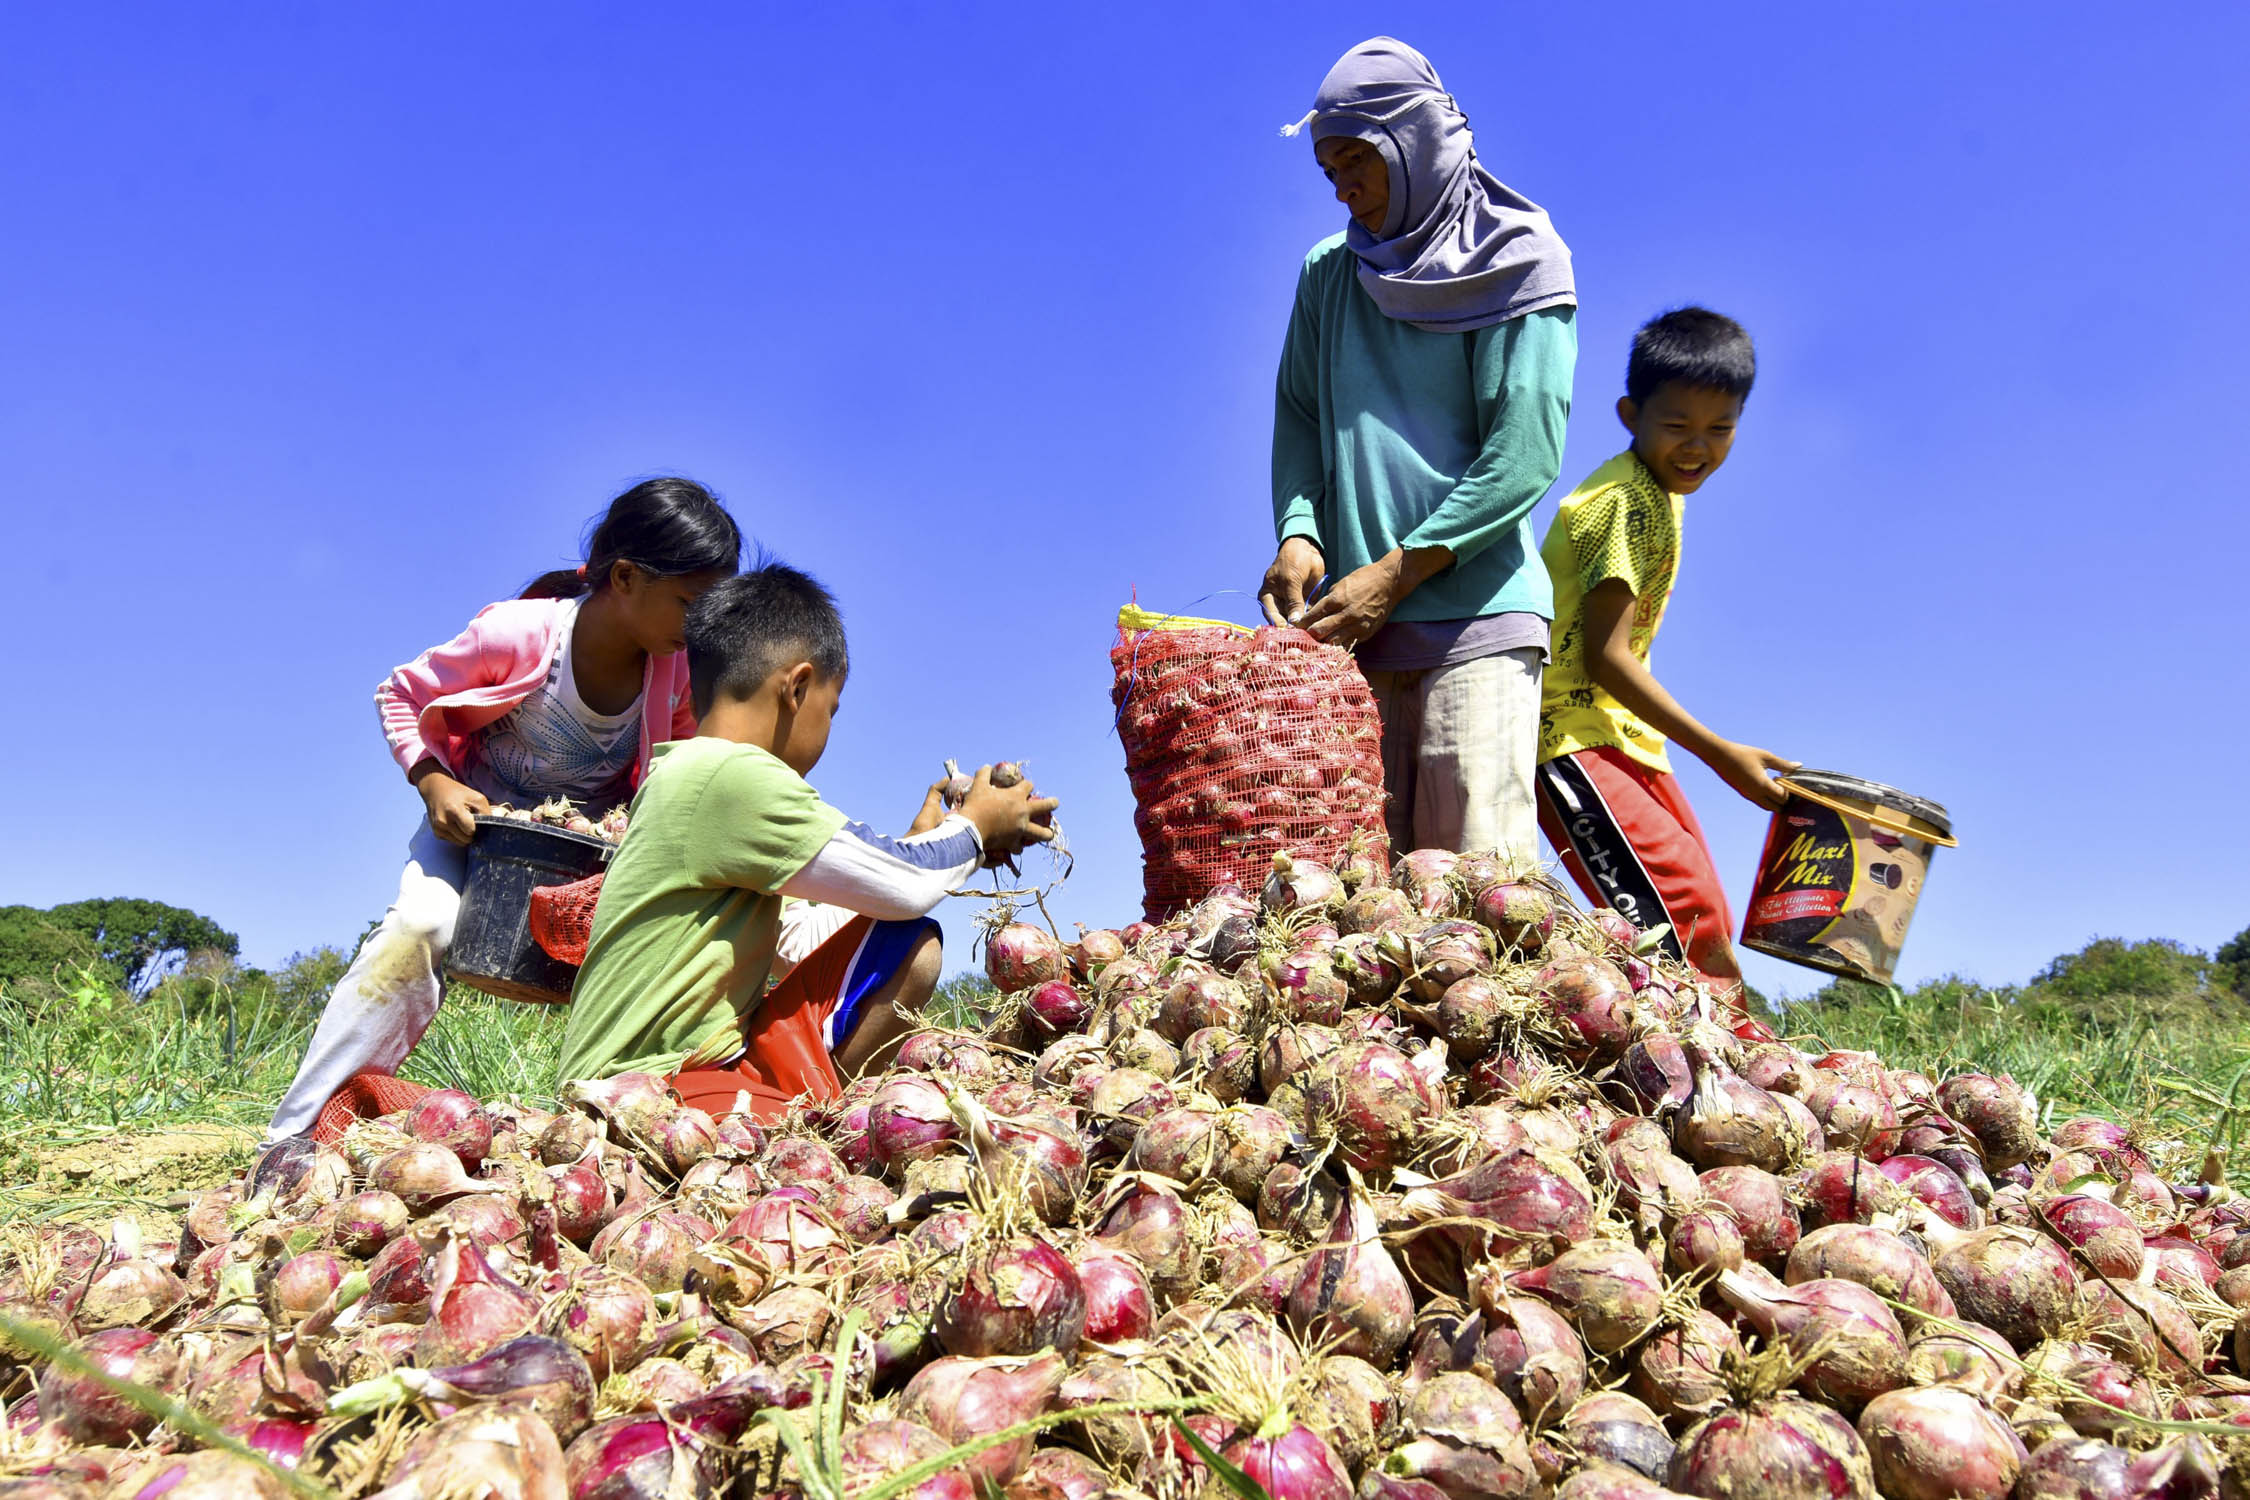 Onion Farming In The Philippines